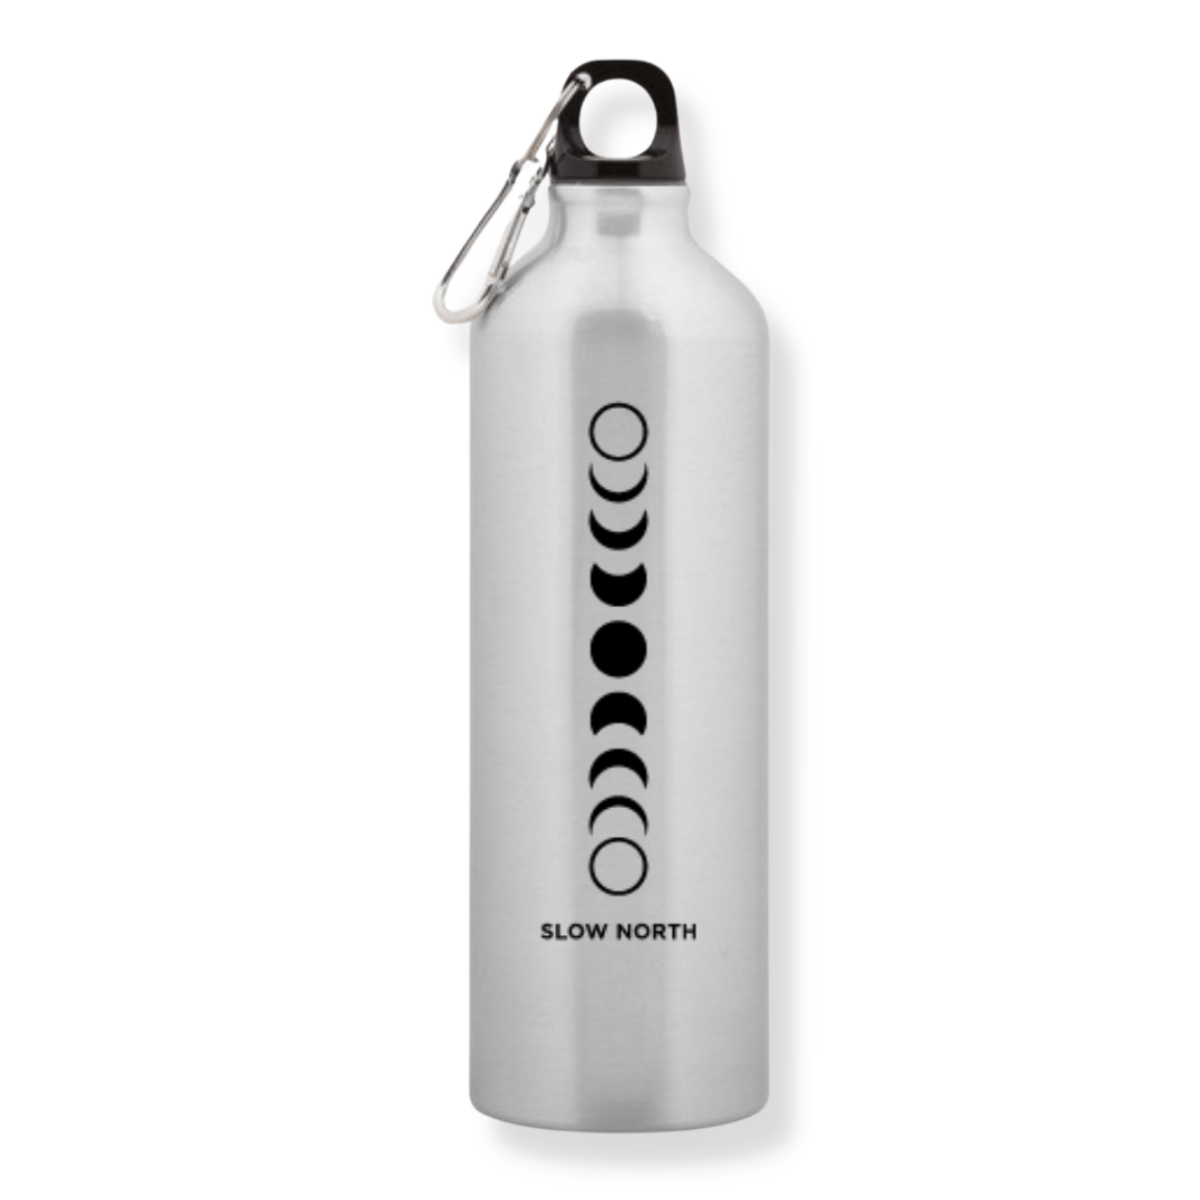 White Stainless Steel Water Bottle, Mindfulness First Logo